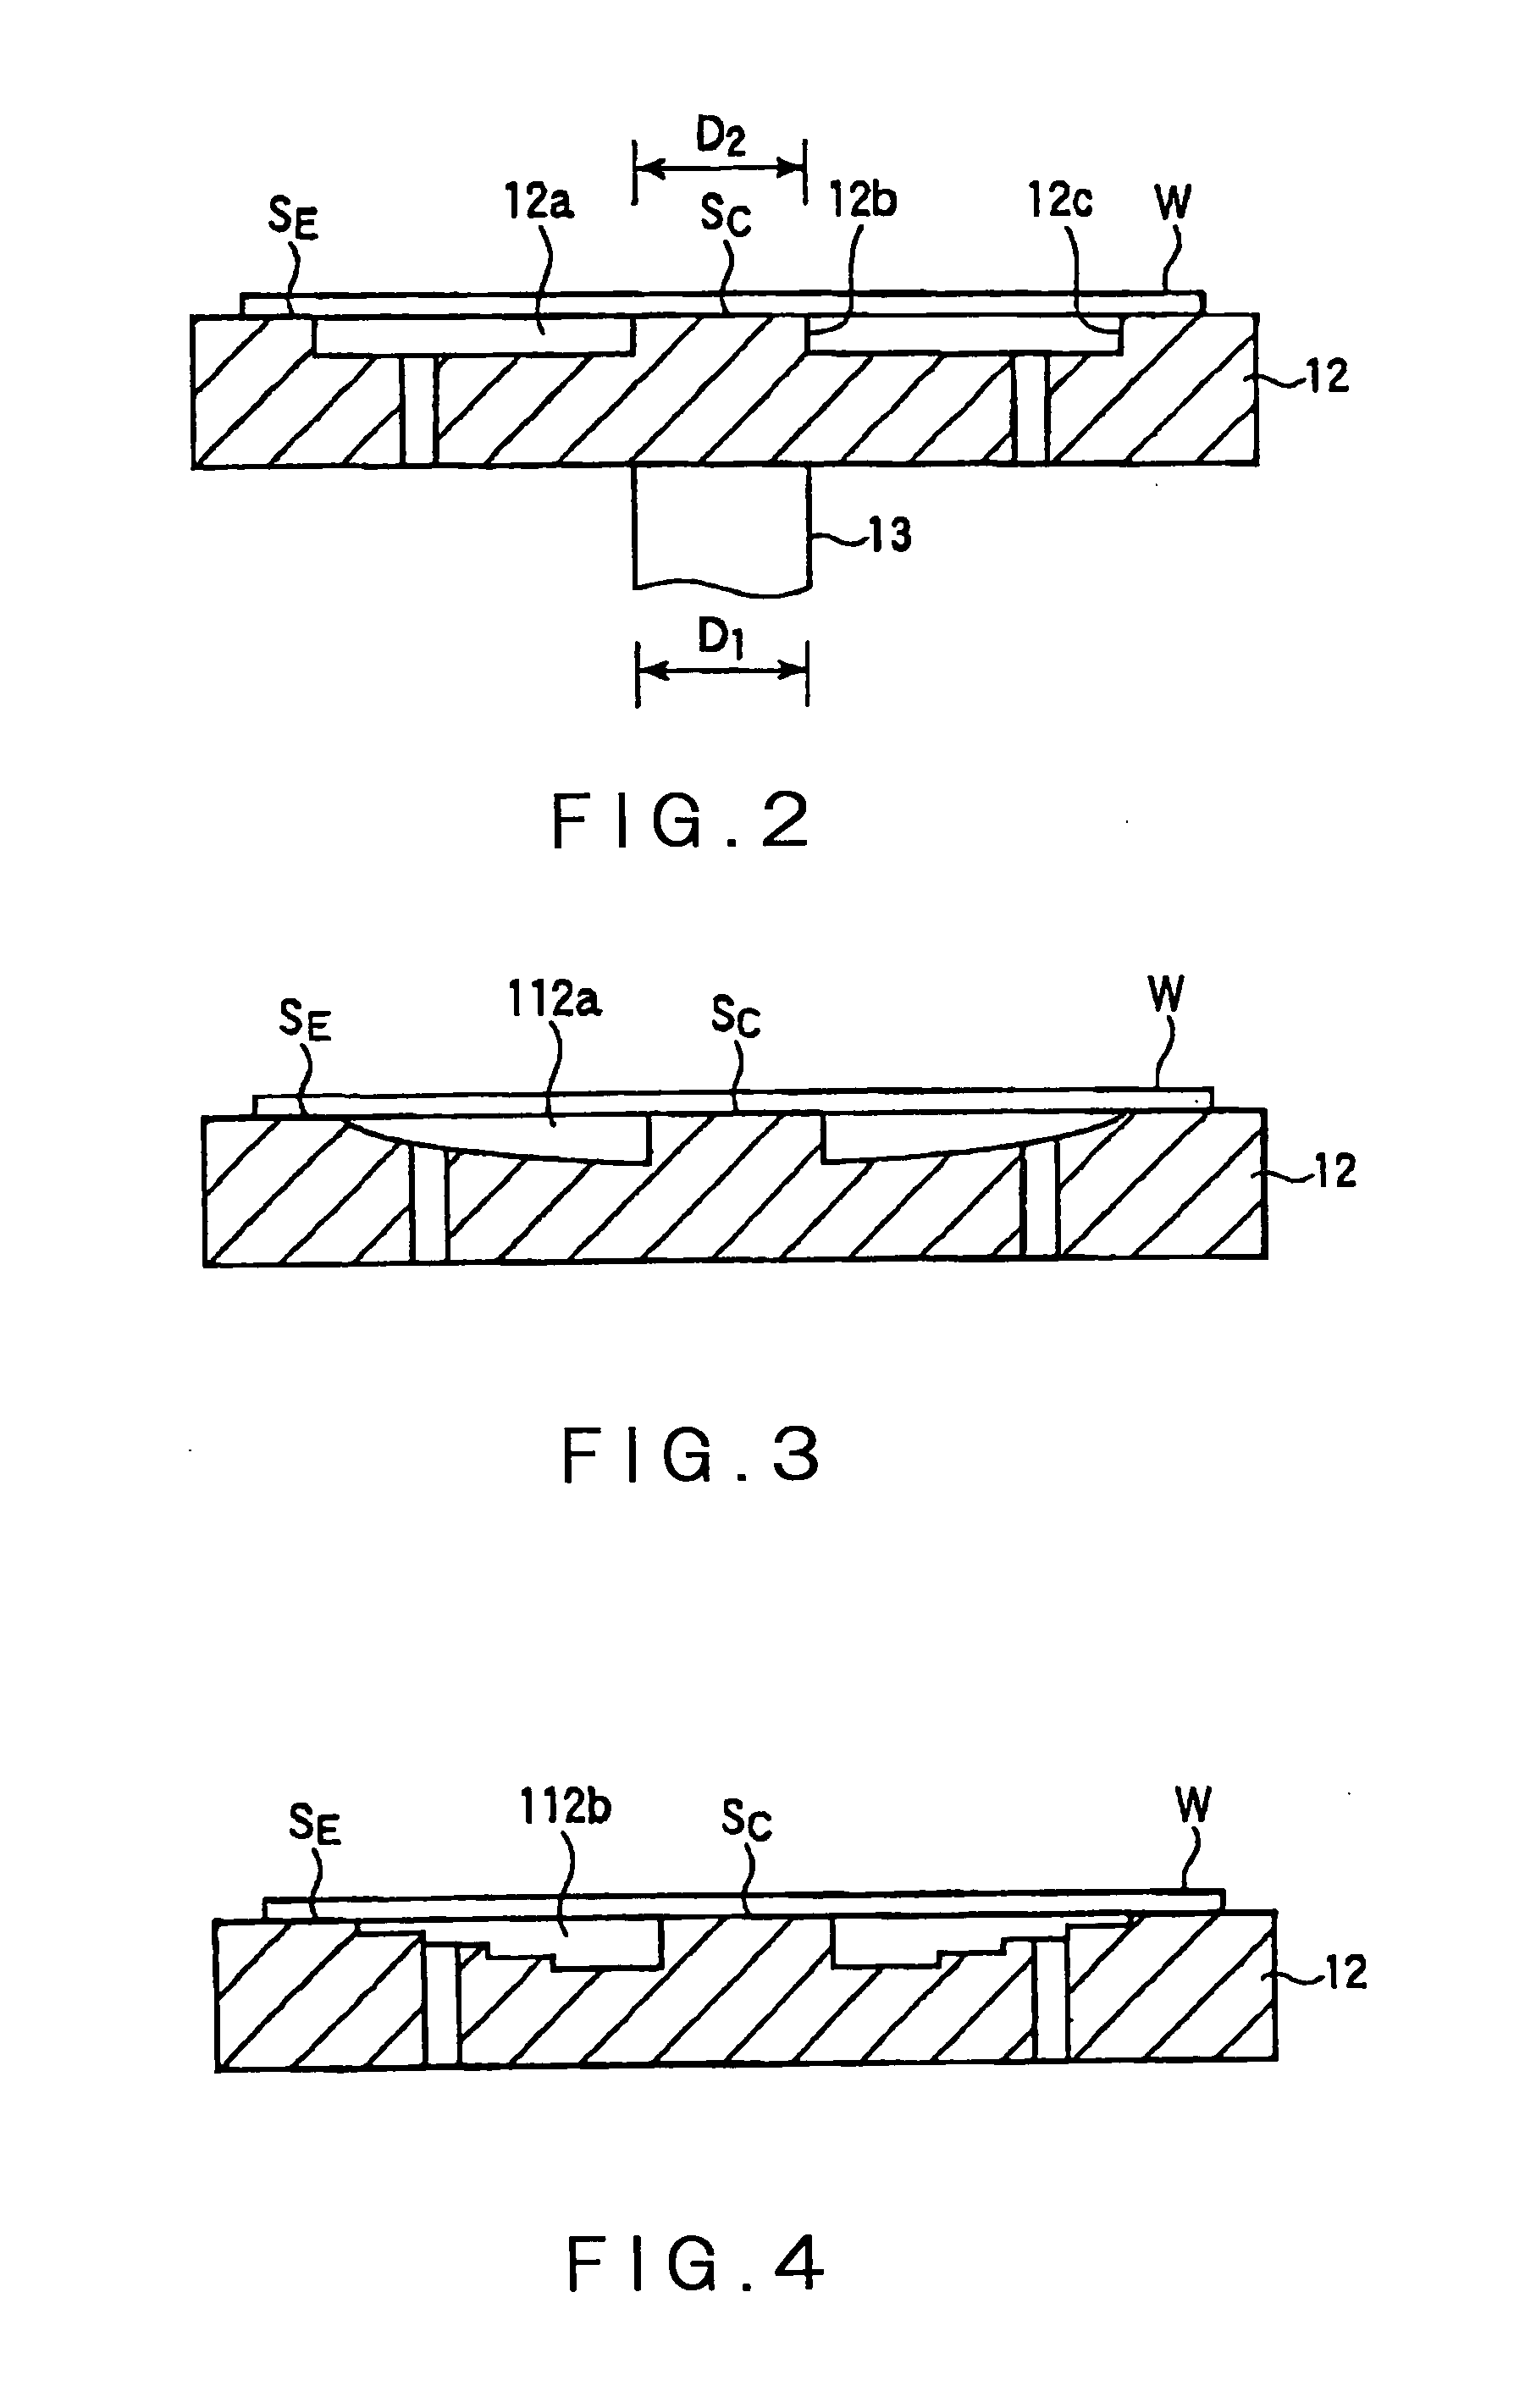 Substrate Processing Apparatus and Substrate Mount Table Used in the Apparatus